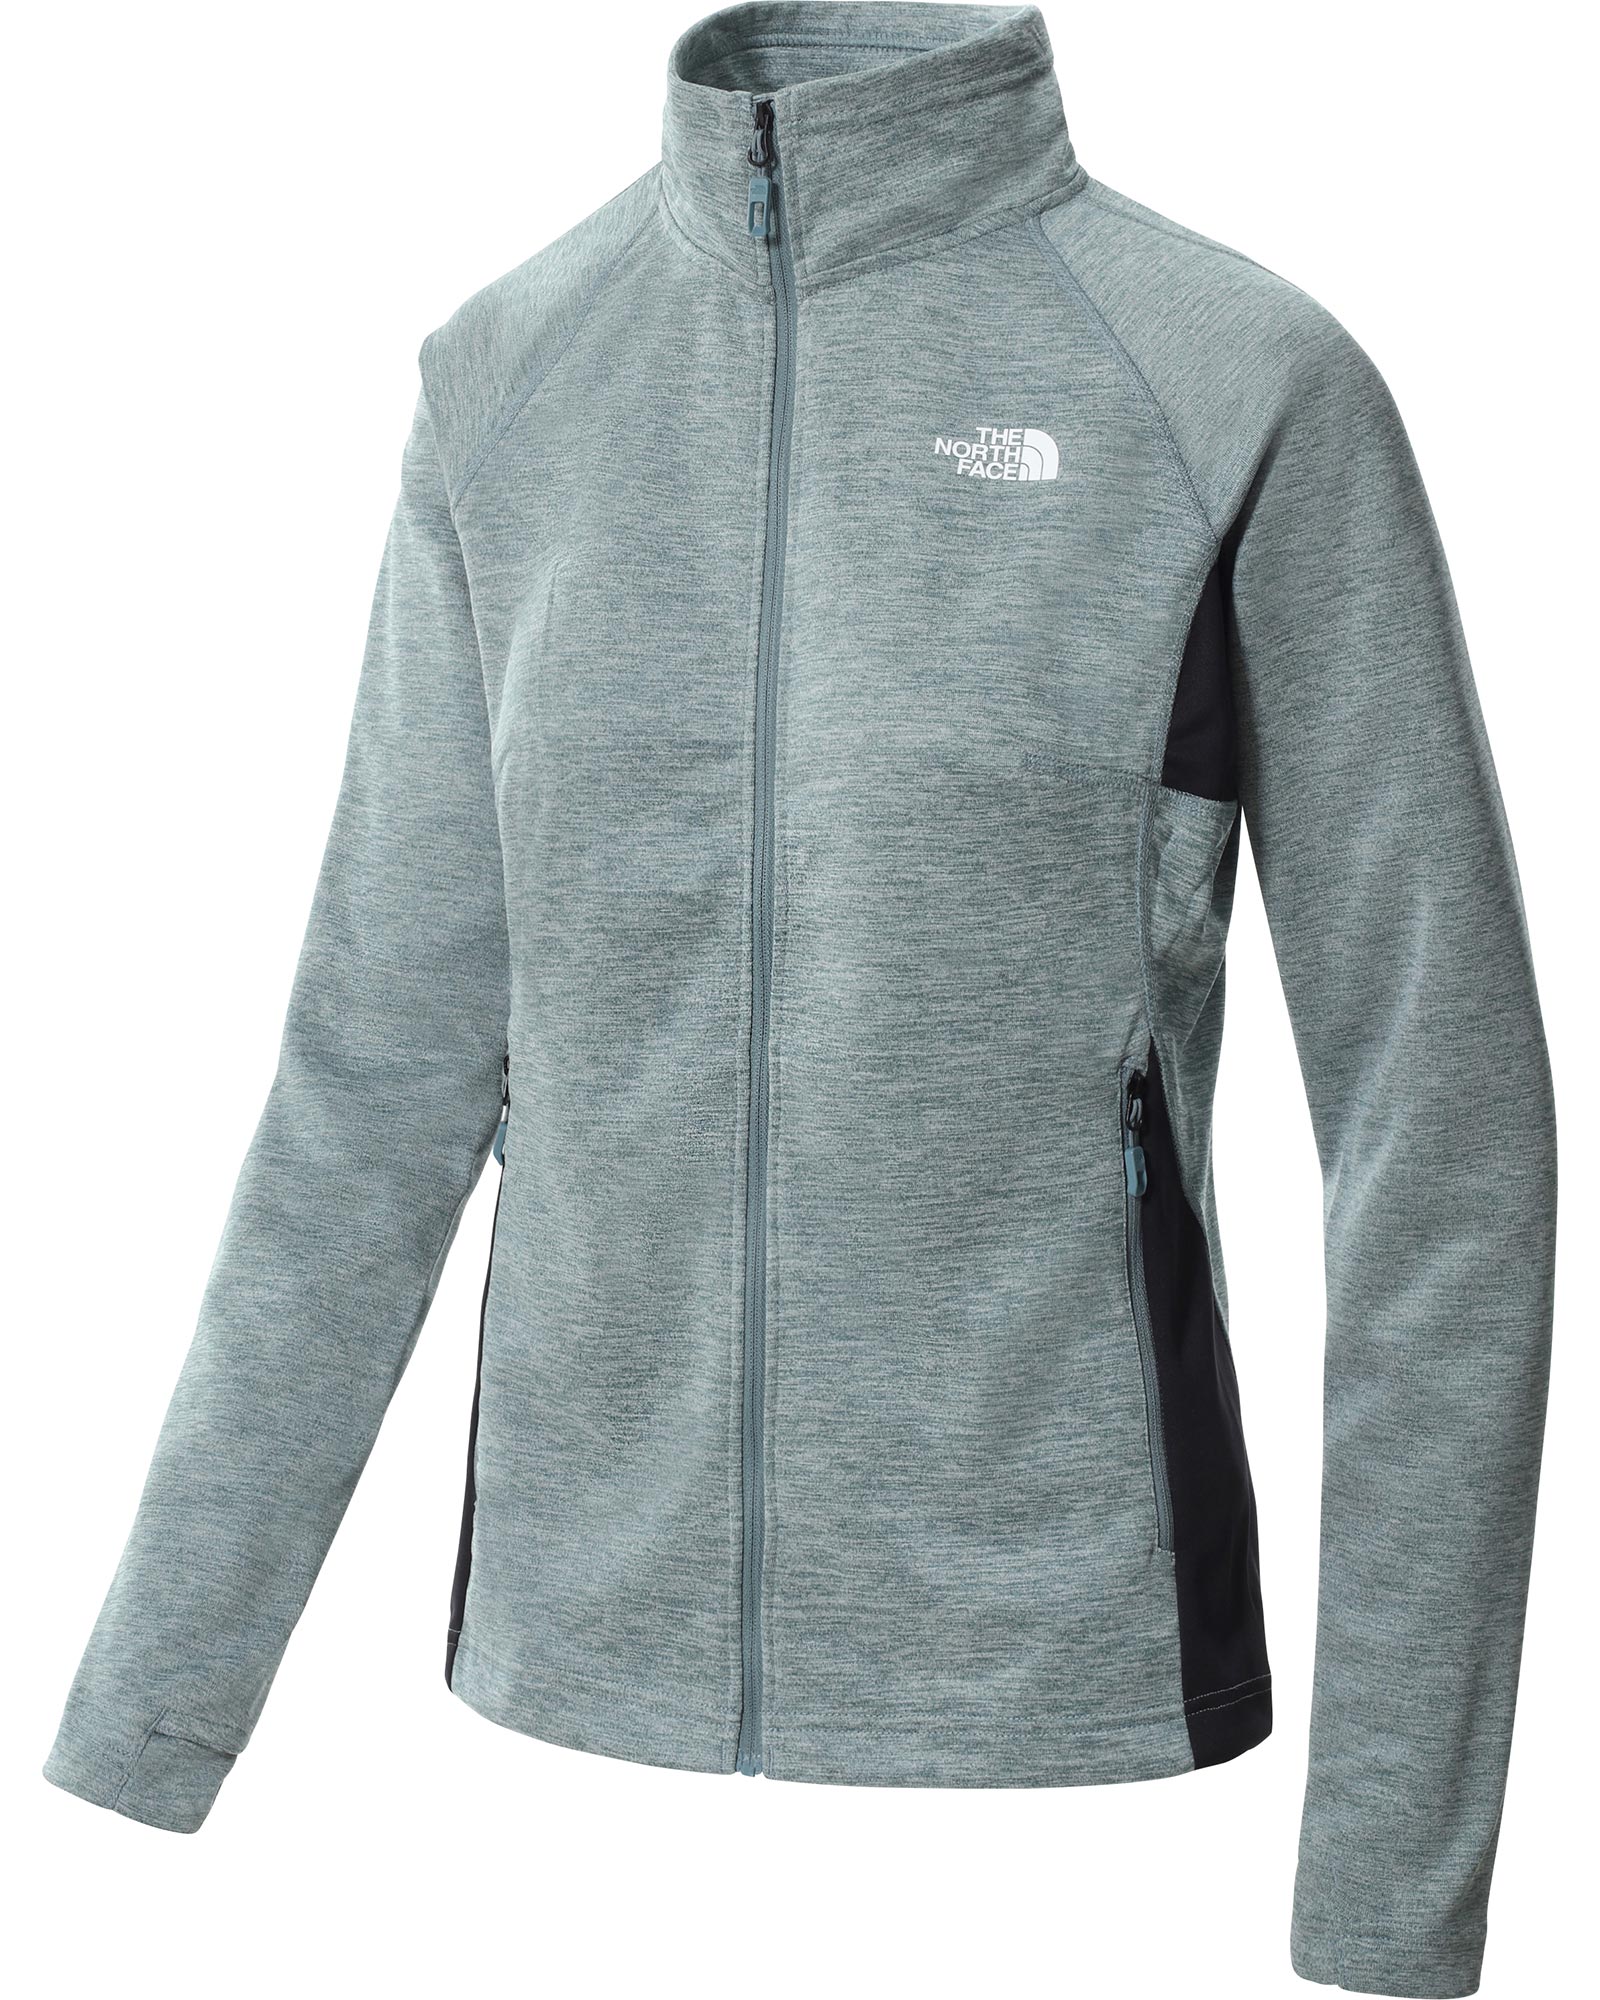 The North Face AO mid layer Women’s Full Zip Jacket - Goblin Blue S